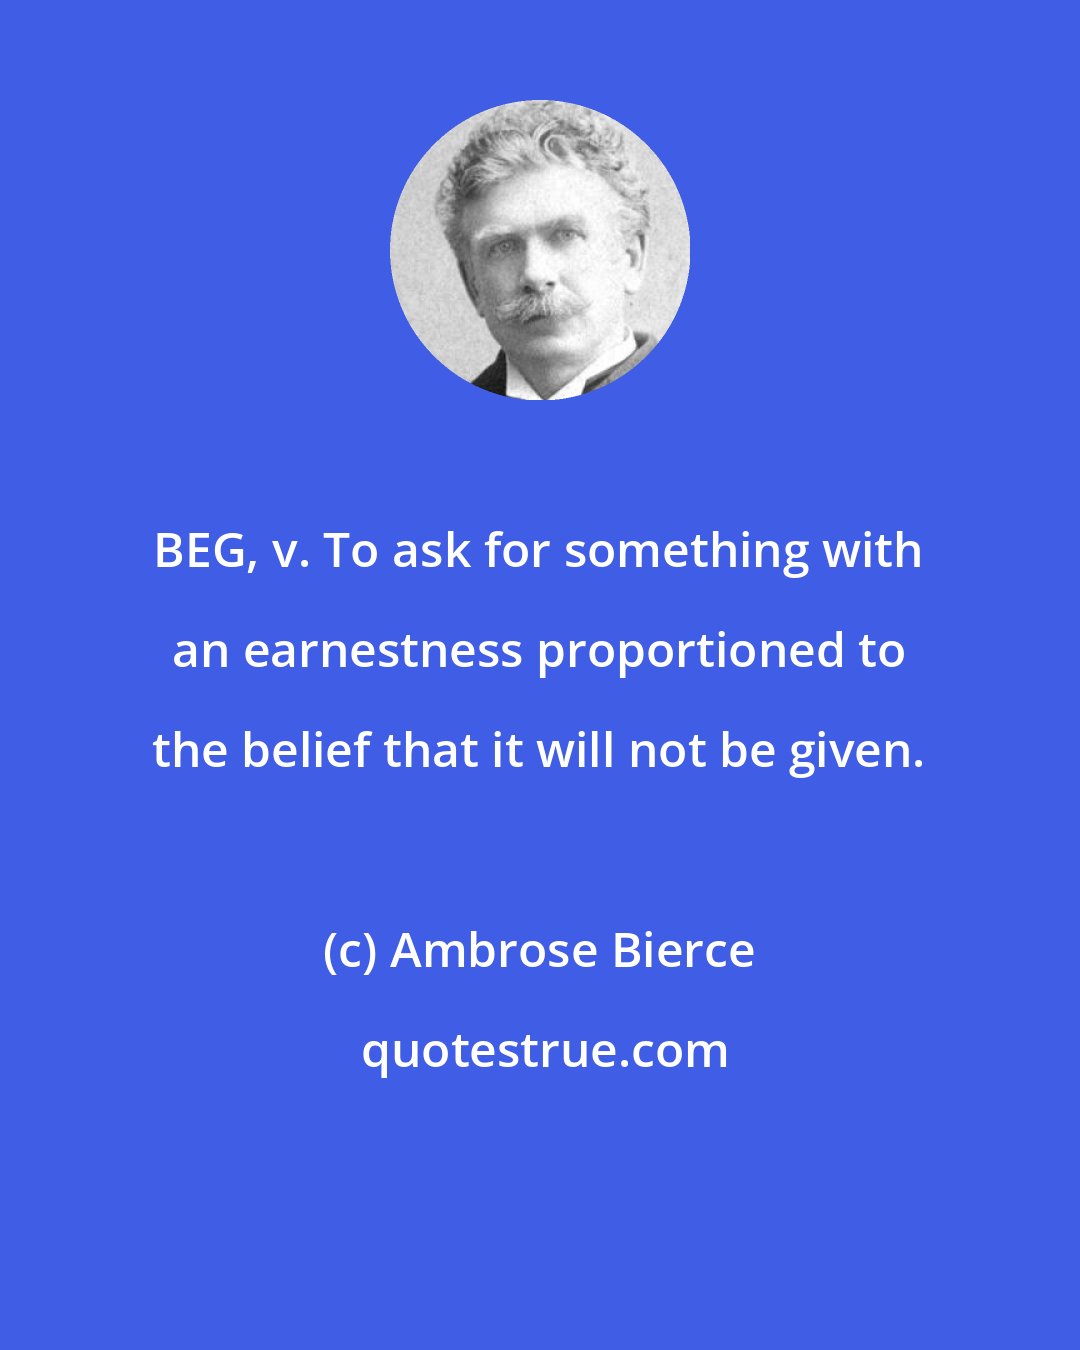 Ambrose Bierce: BEG, v. To ask for something with an earnestness proportioned to the belief that it will not be given.